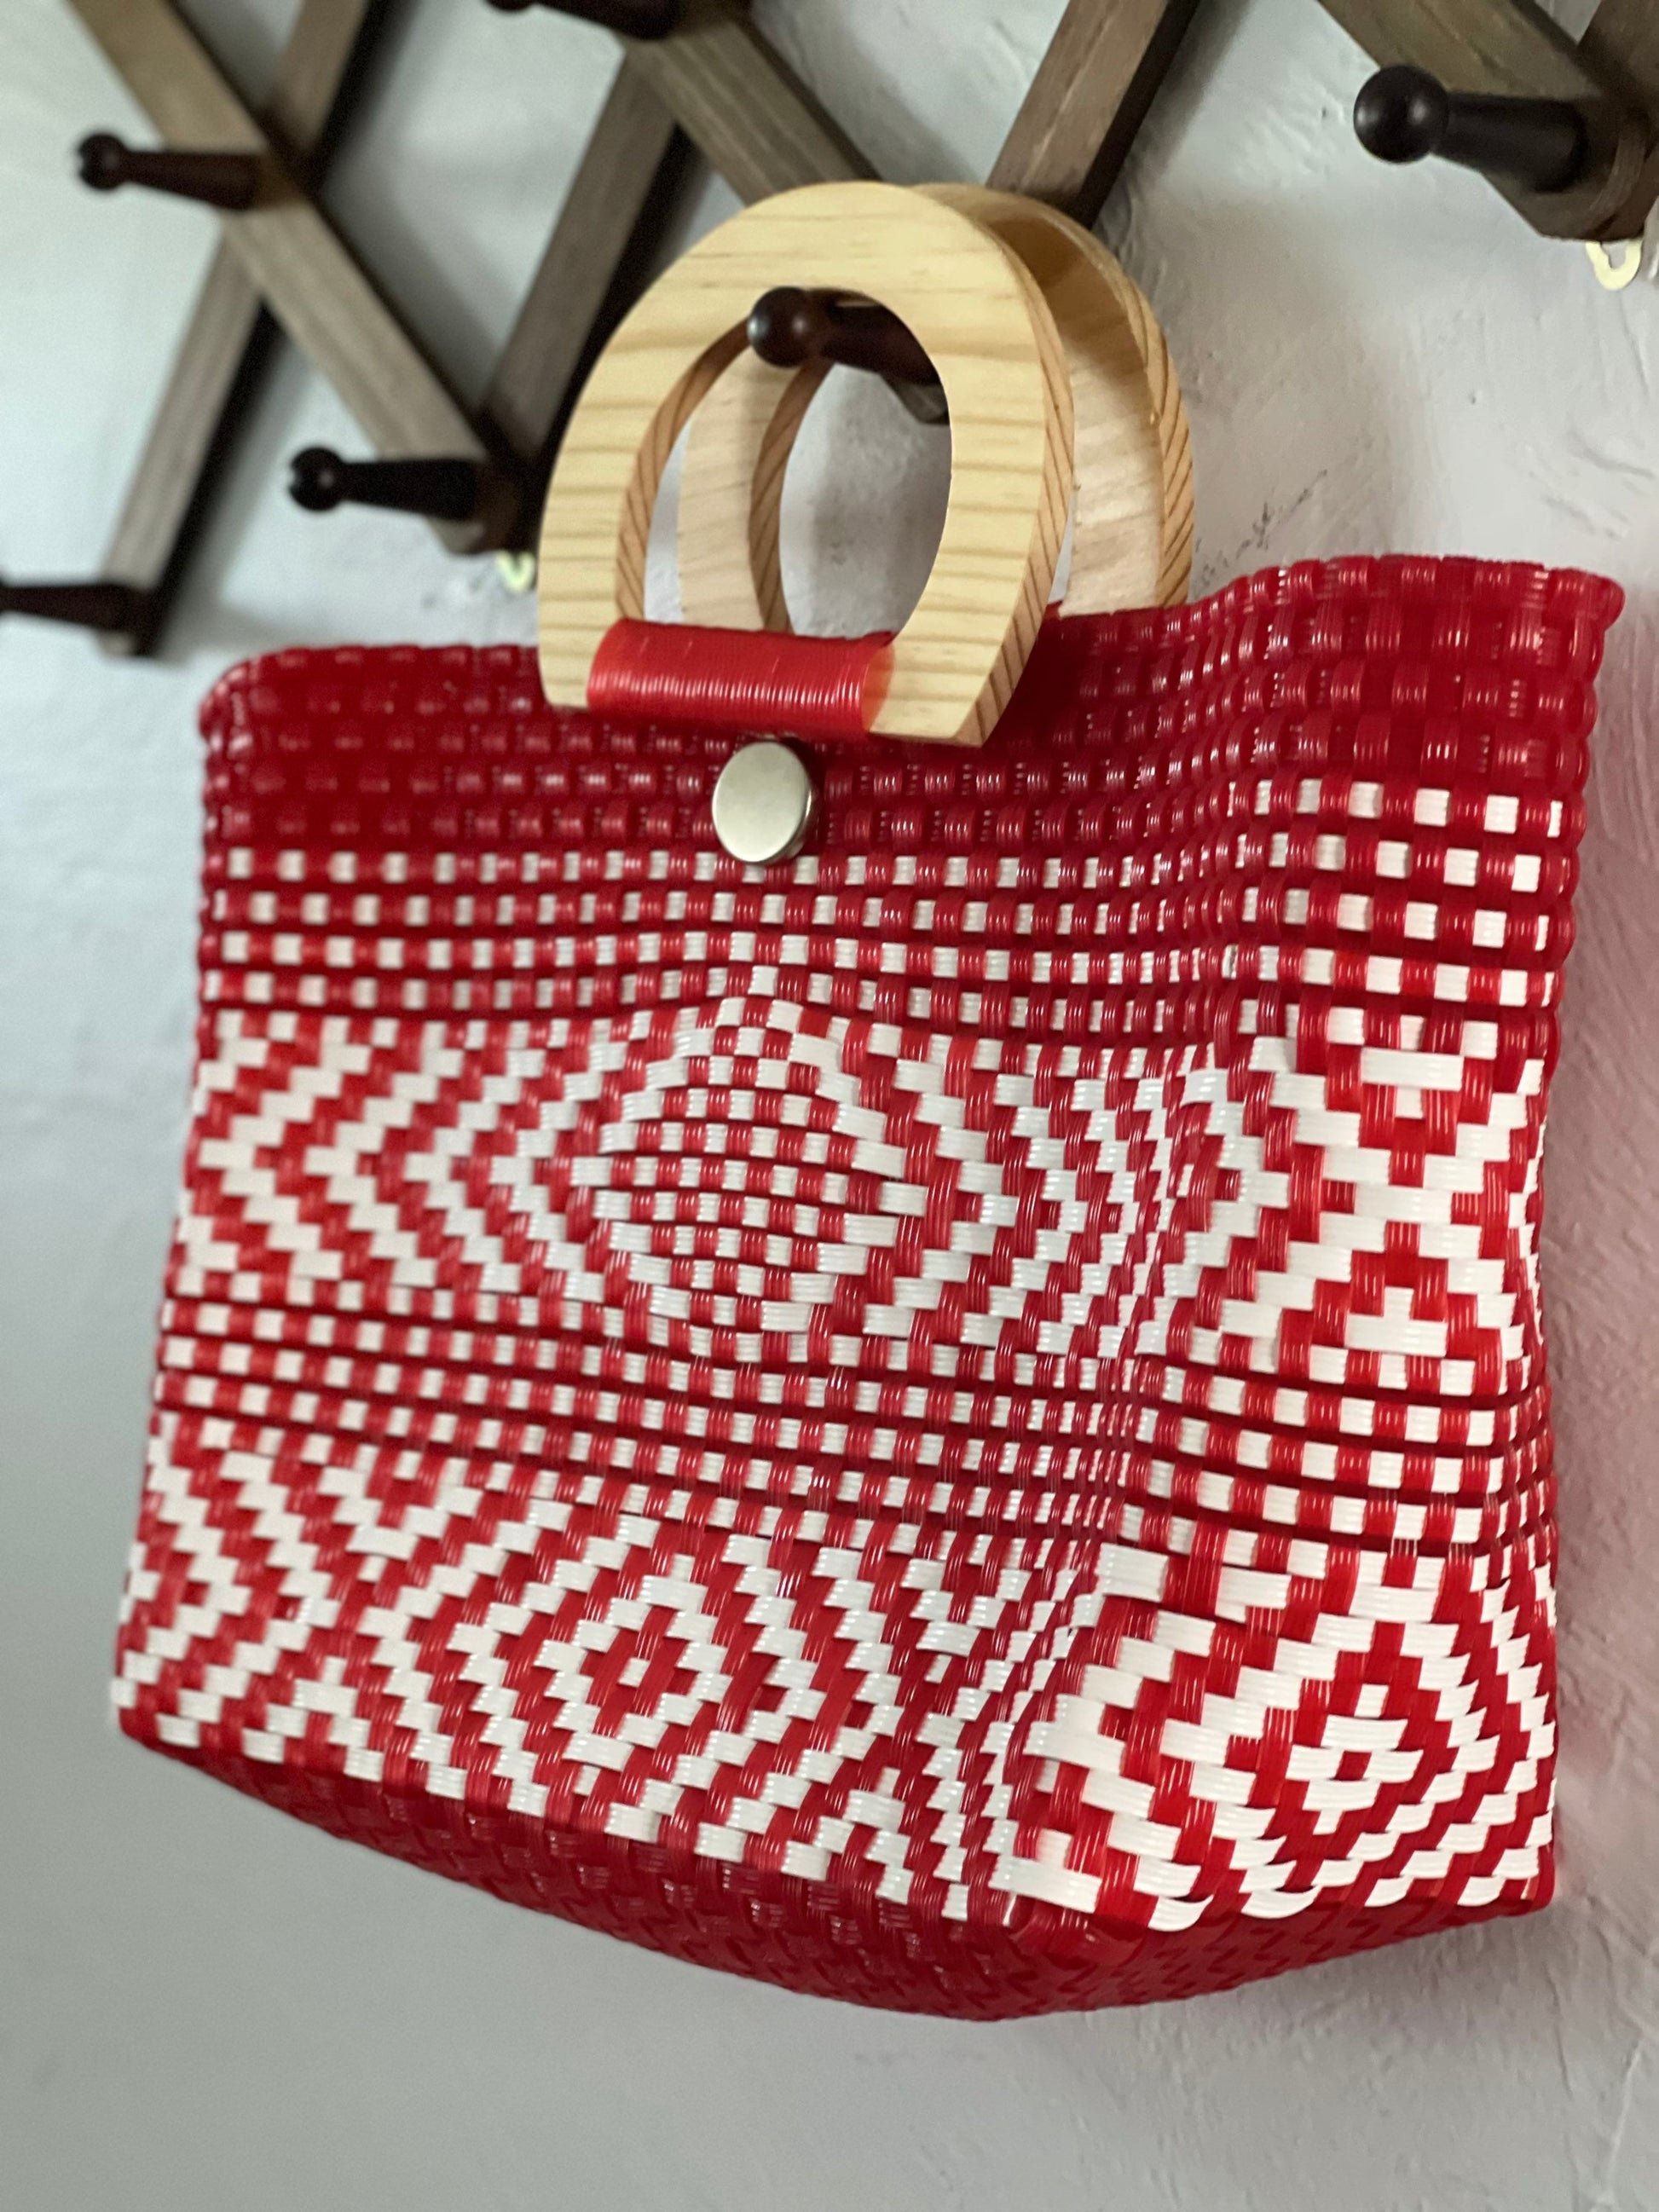 Mexican Handbag. Recycled Plastic Bag. Mexican Bag With 